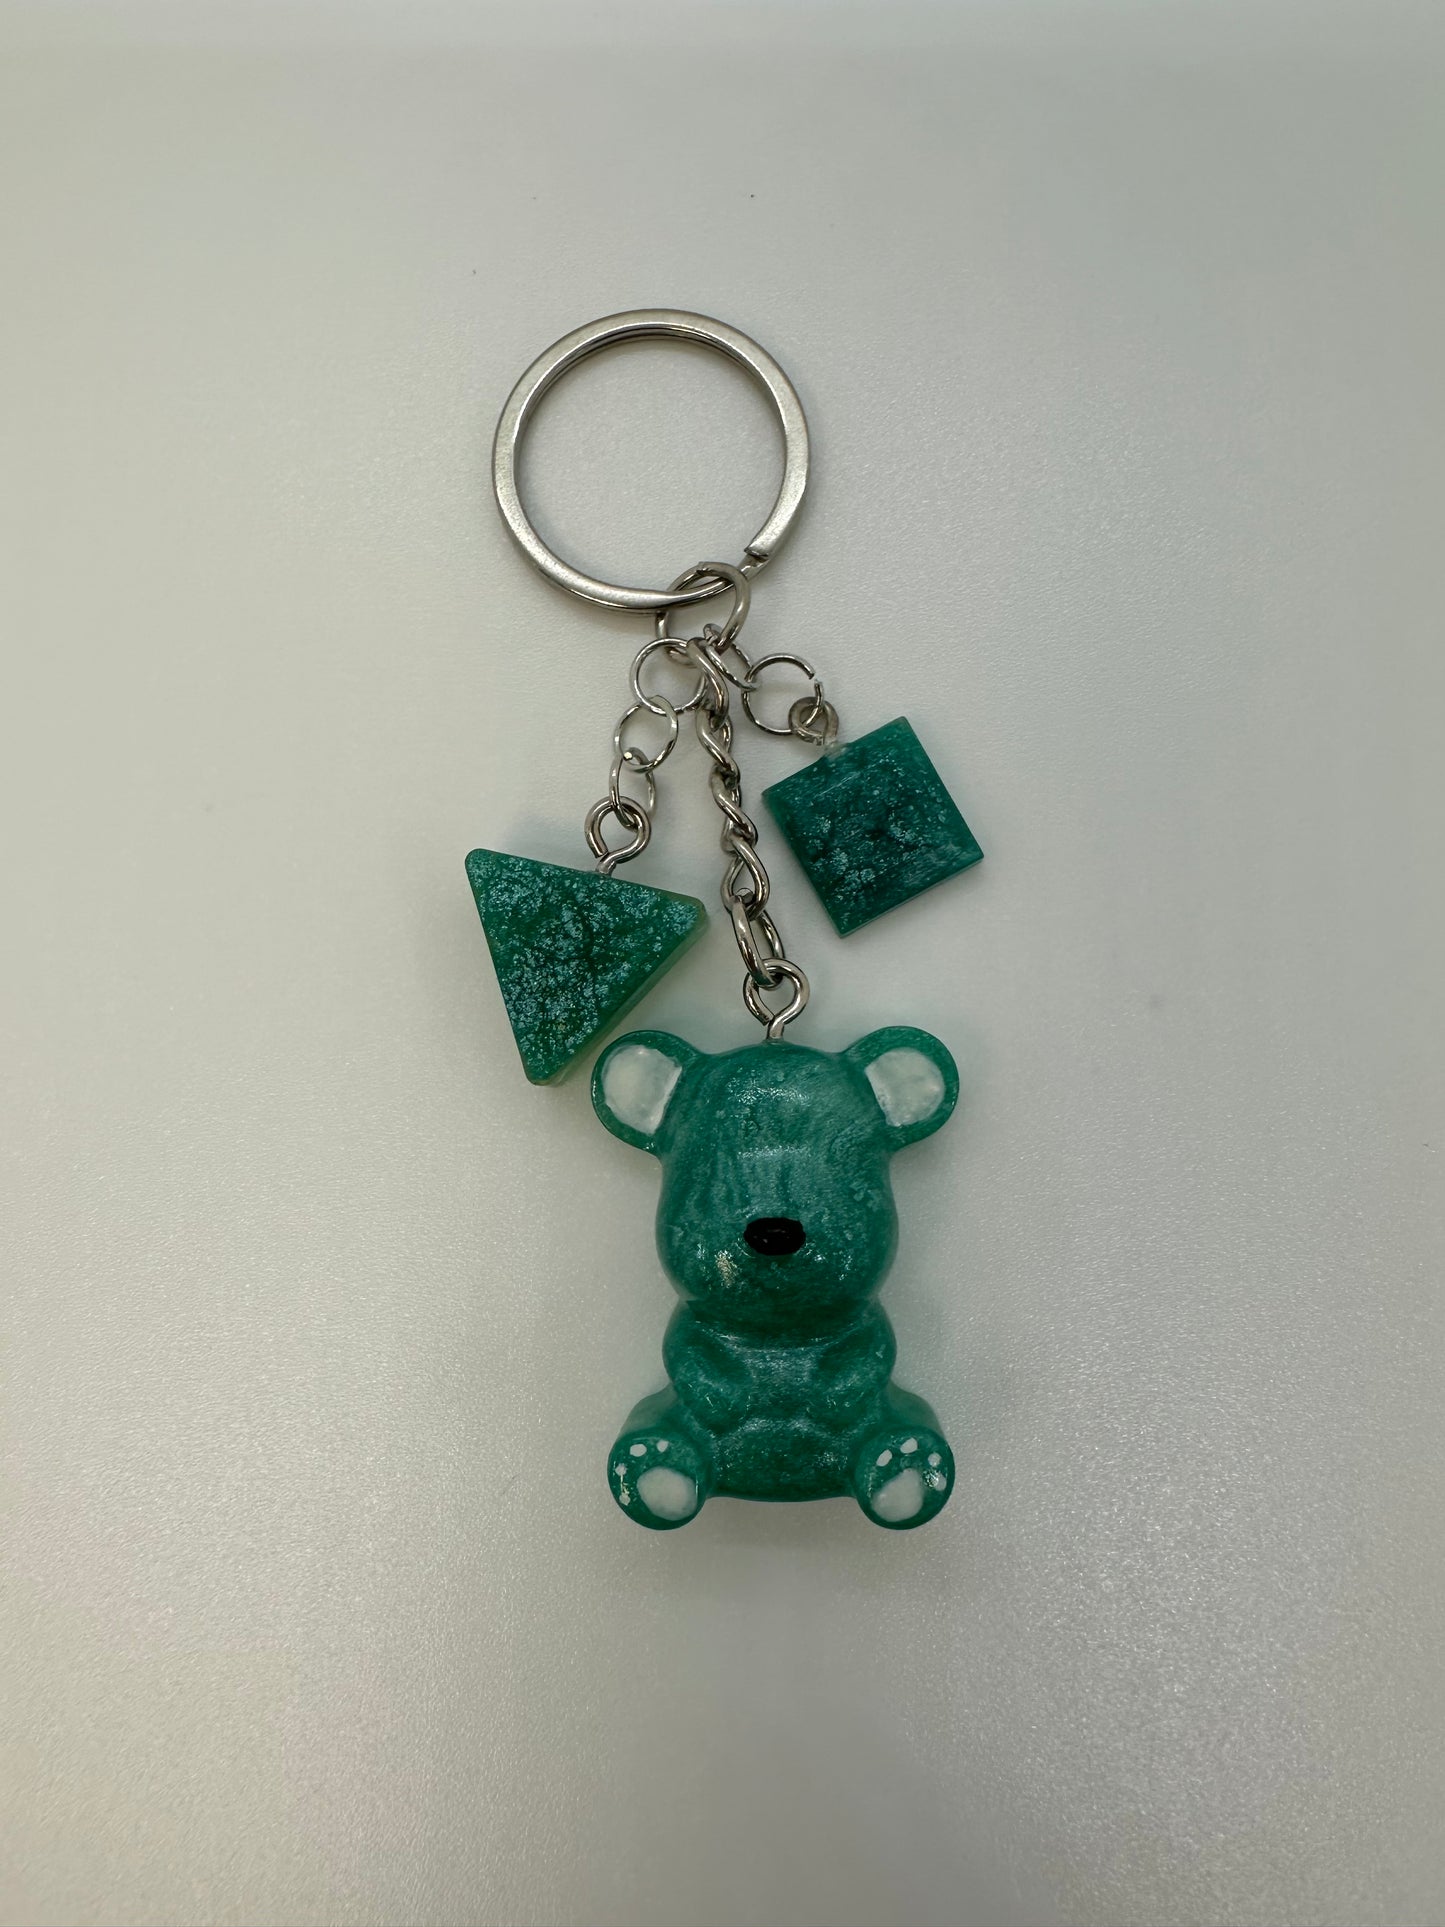 Green Teddy Bear Keychain with Matching Charms